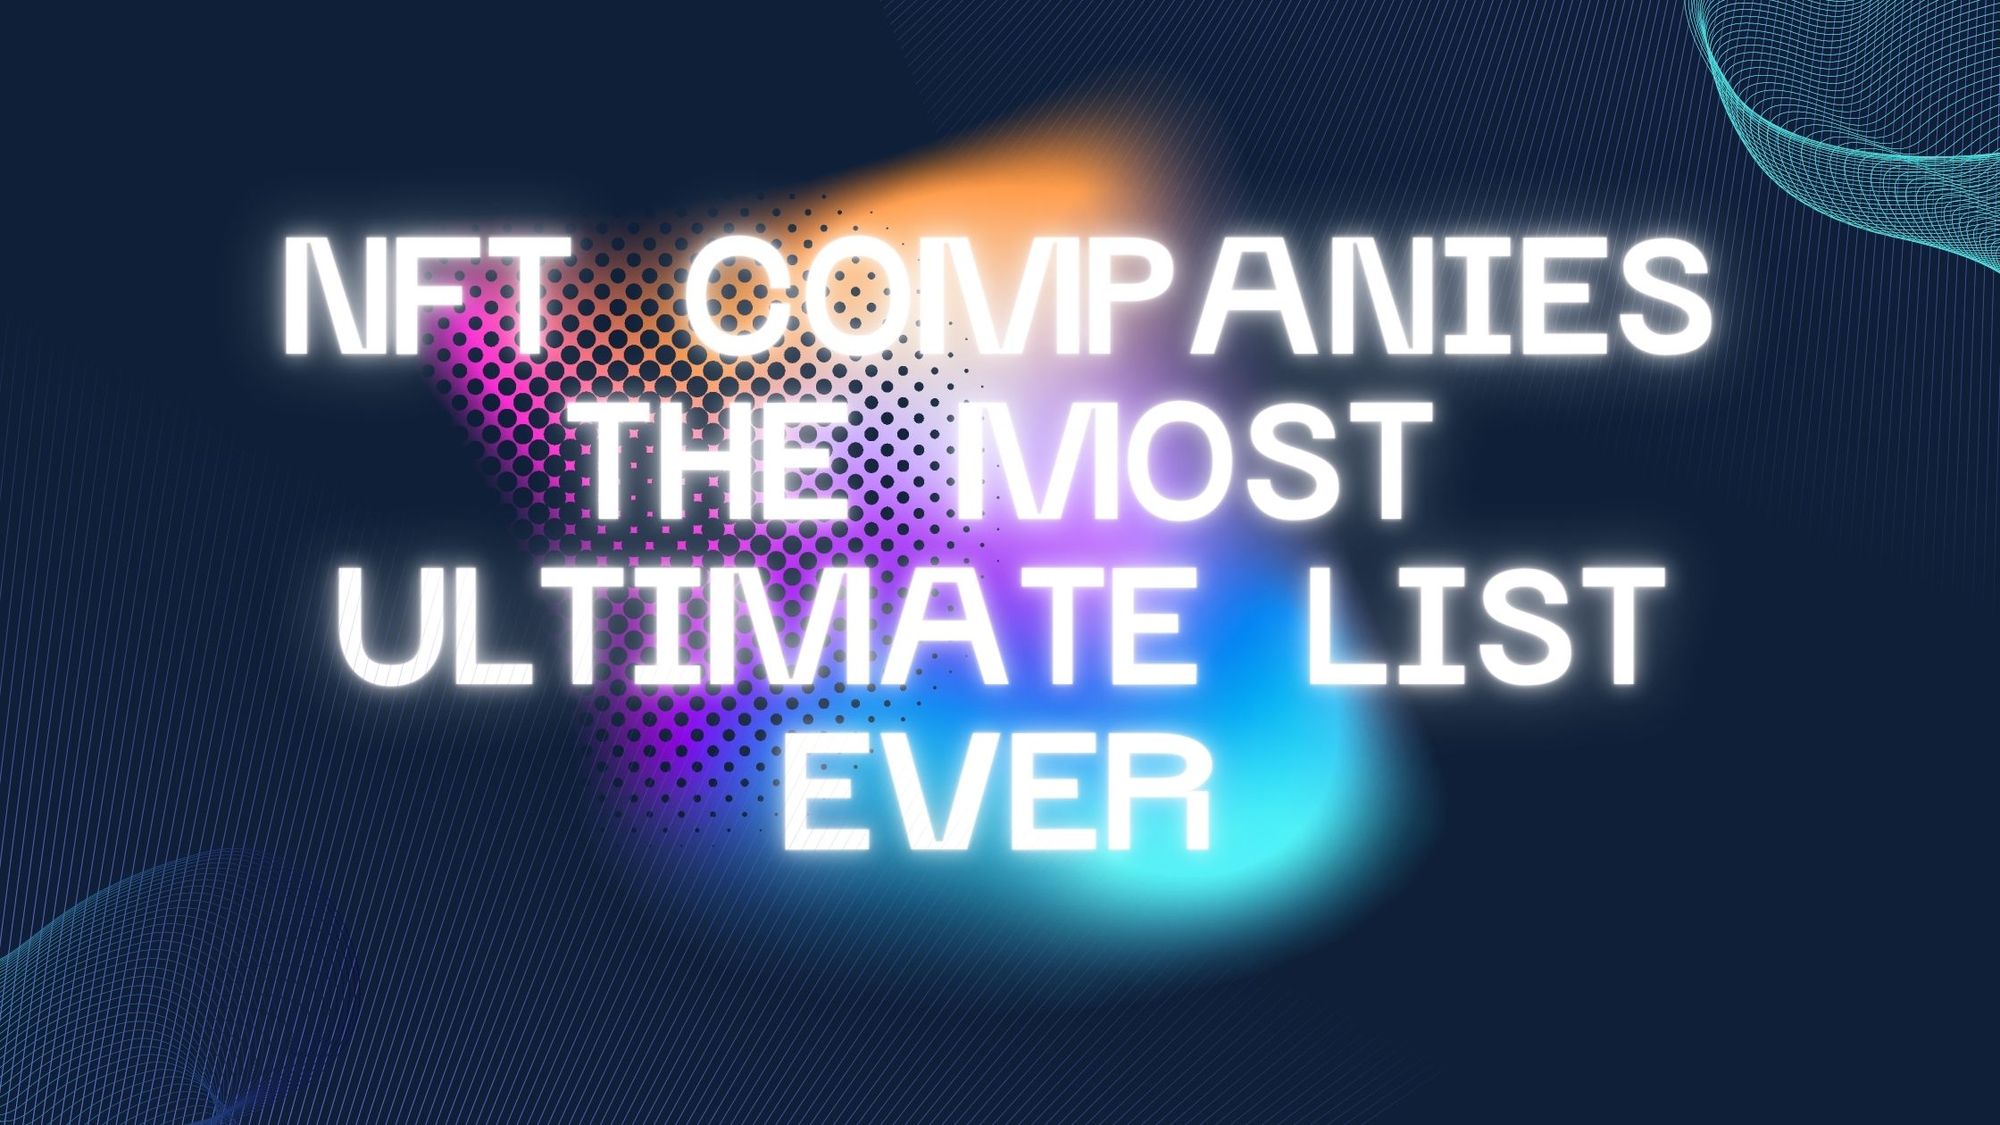 An image with dream like retro colours in blues and pinks with the words "NFT Companies, the most ultimate list ever"